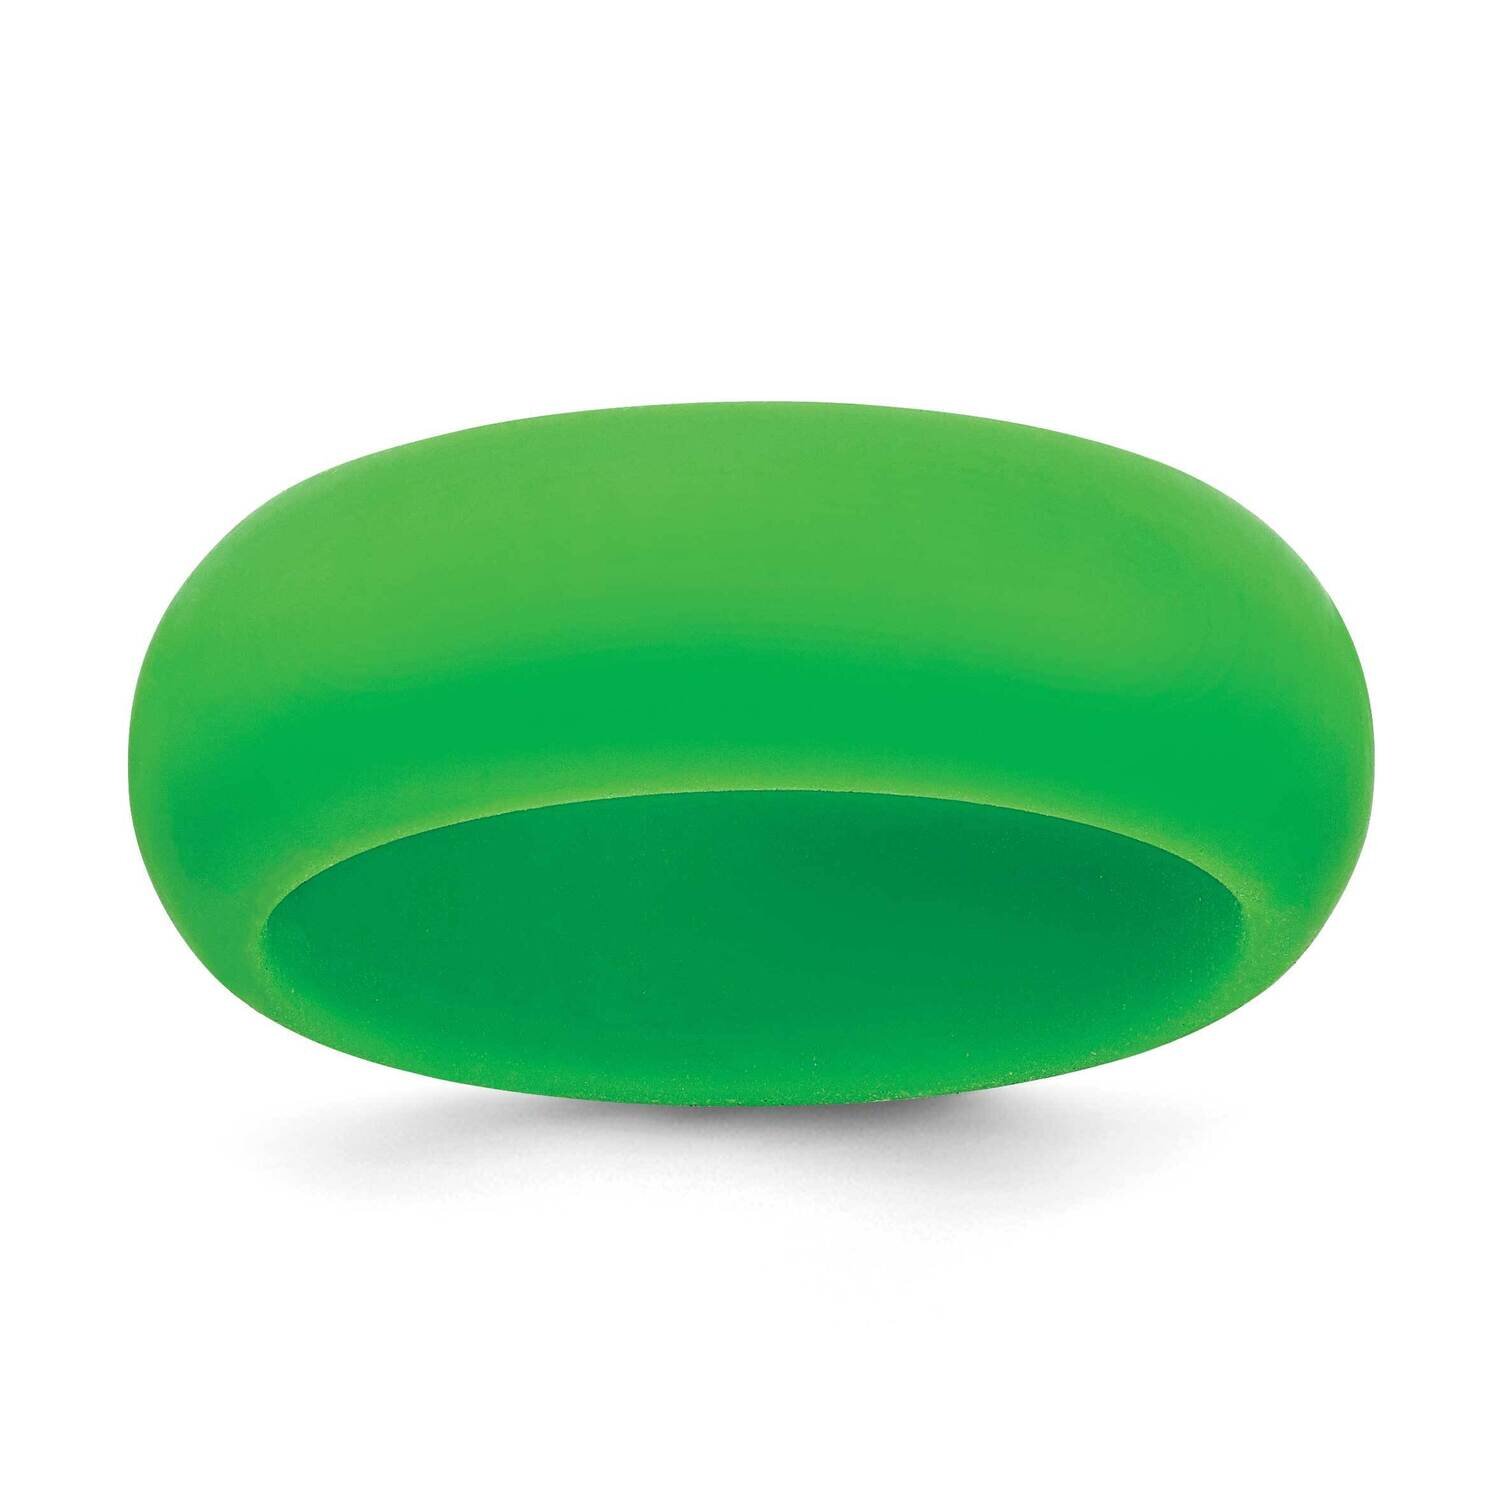 Green 8mm Domed Band Silicone SL101-GR-10